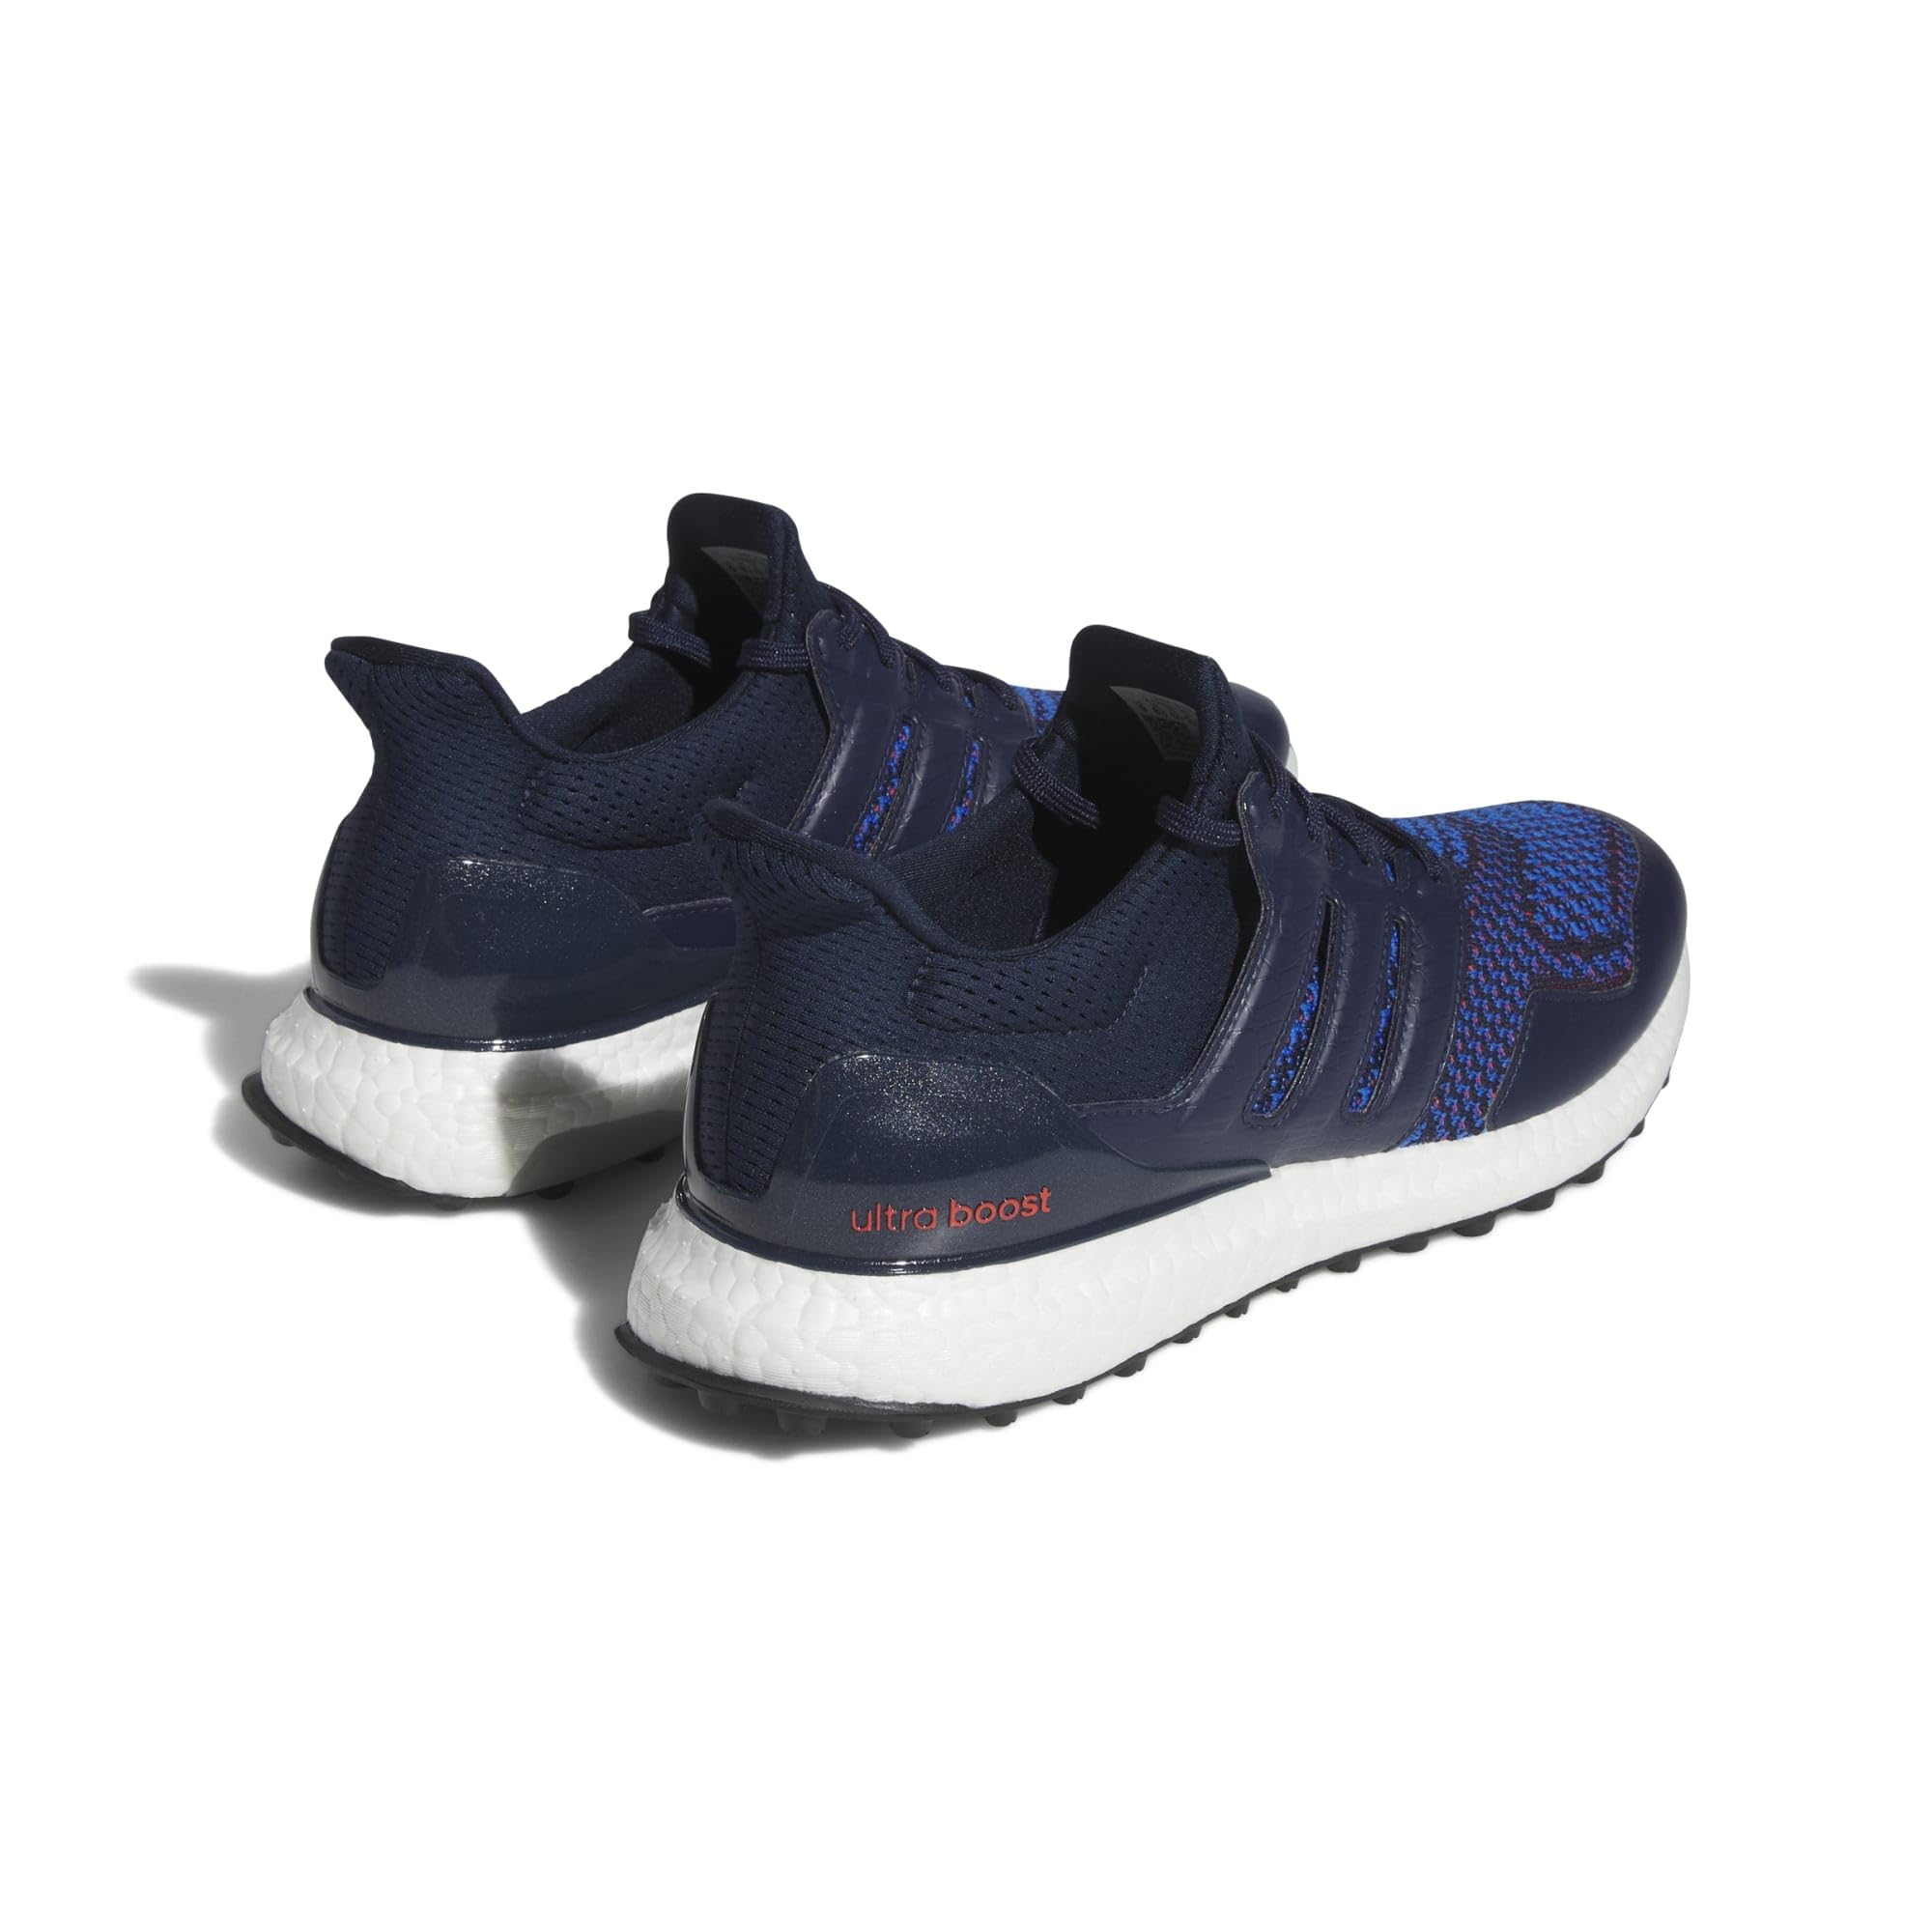 Кроссовки adidas Golf Ultraboost Golf Shoes h2 f11 golf shoes men women professional golf shoes breathable golf training sneakers outdoor golf trainers for running shoes